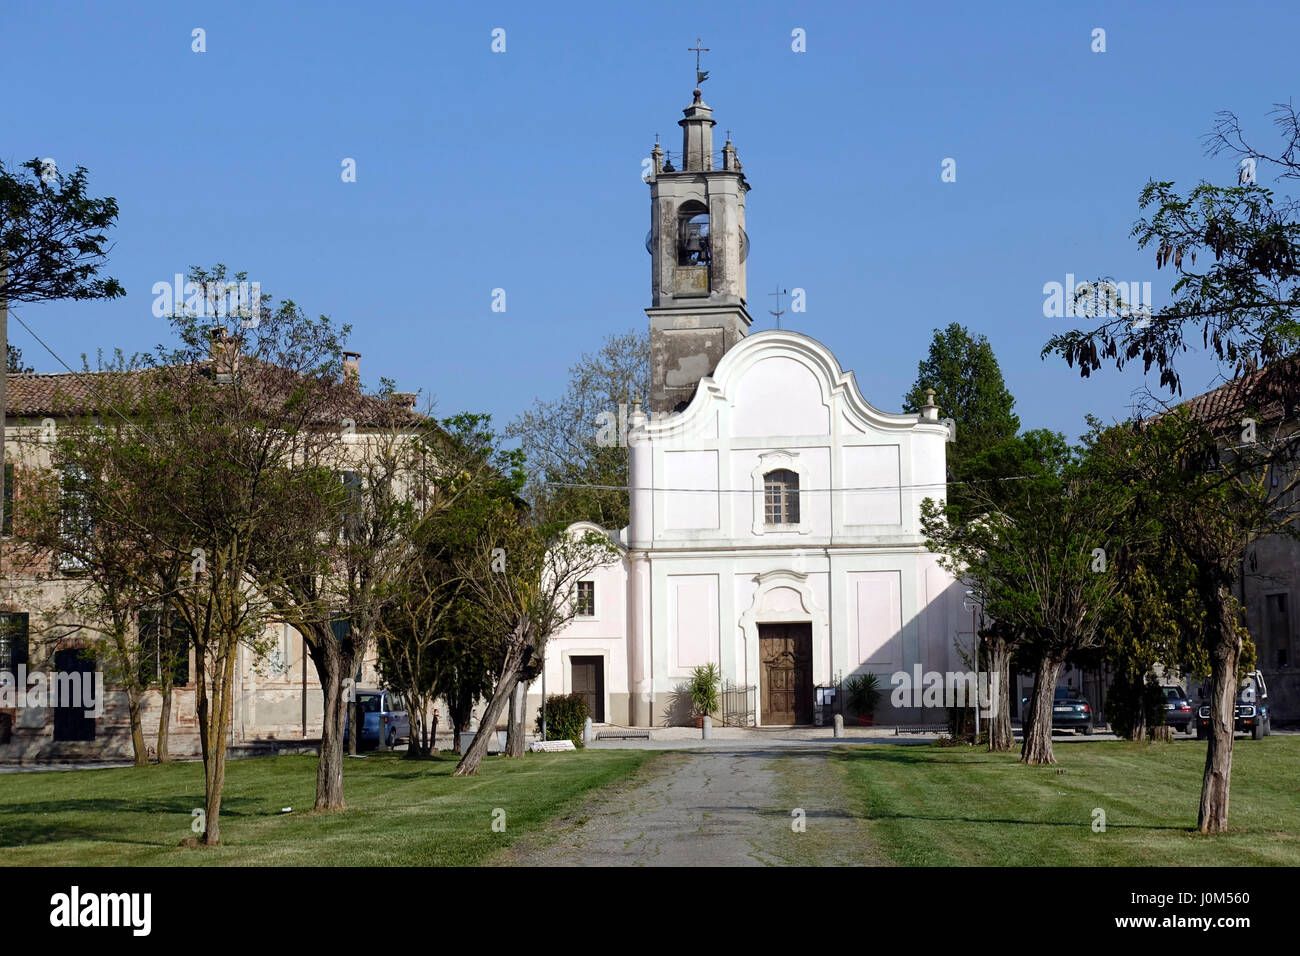 The church of San Benedetto Priorato is a Catholic baroque worship site located in Priory, a small hamlet of Fontanellato, in the province of Parma. Stock Photo